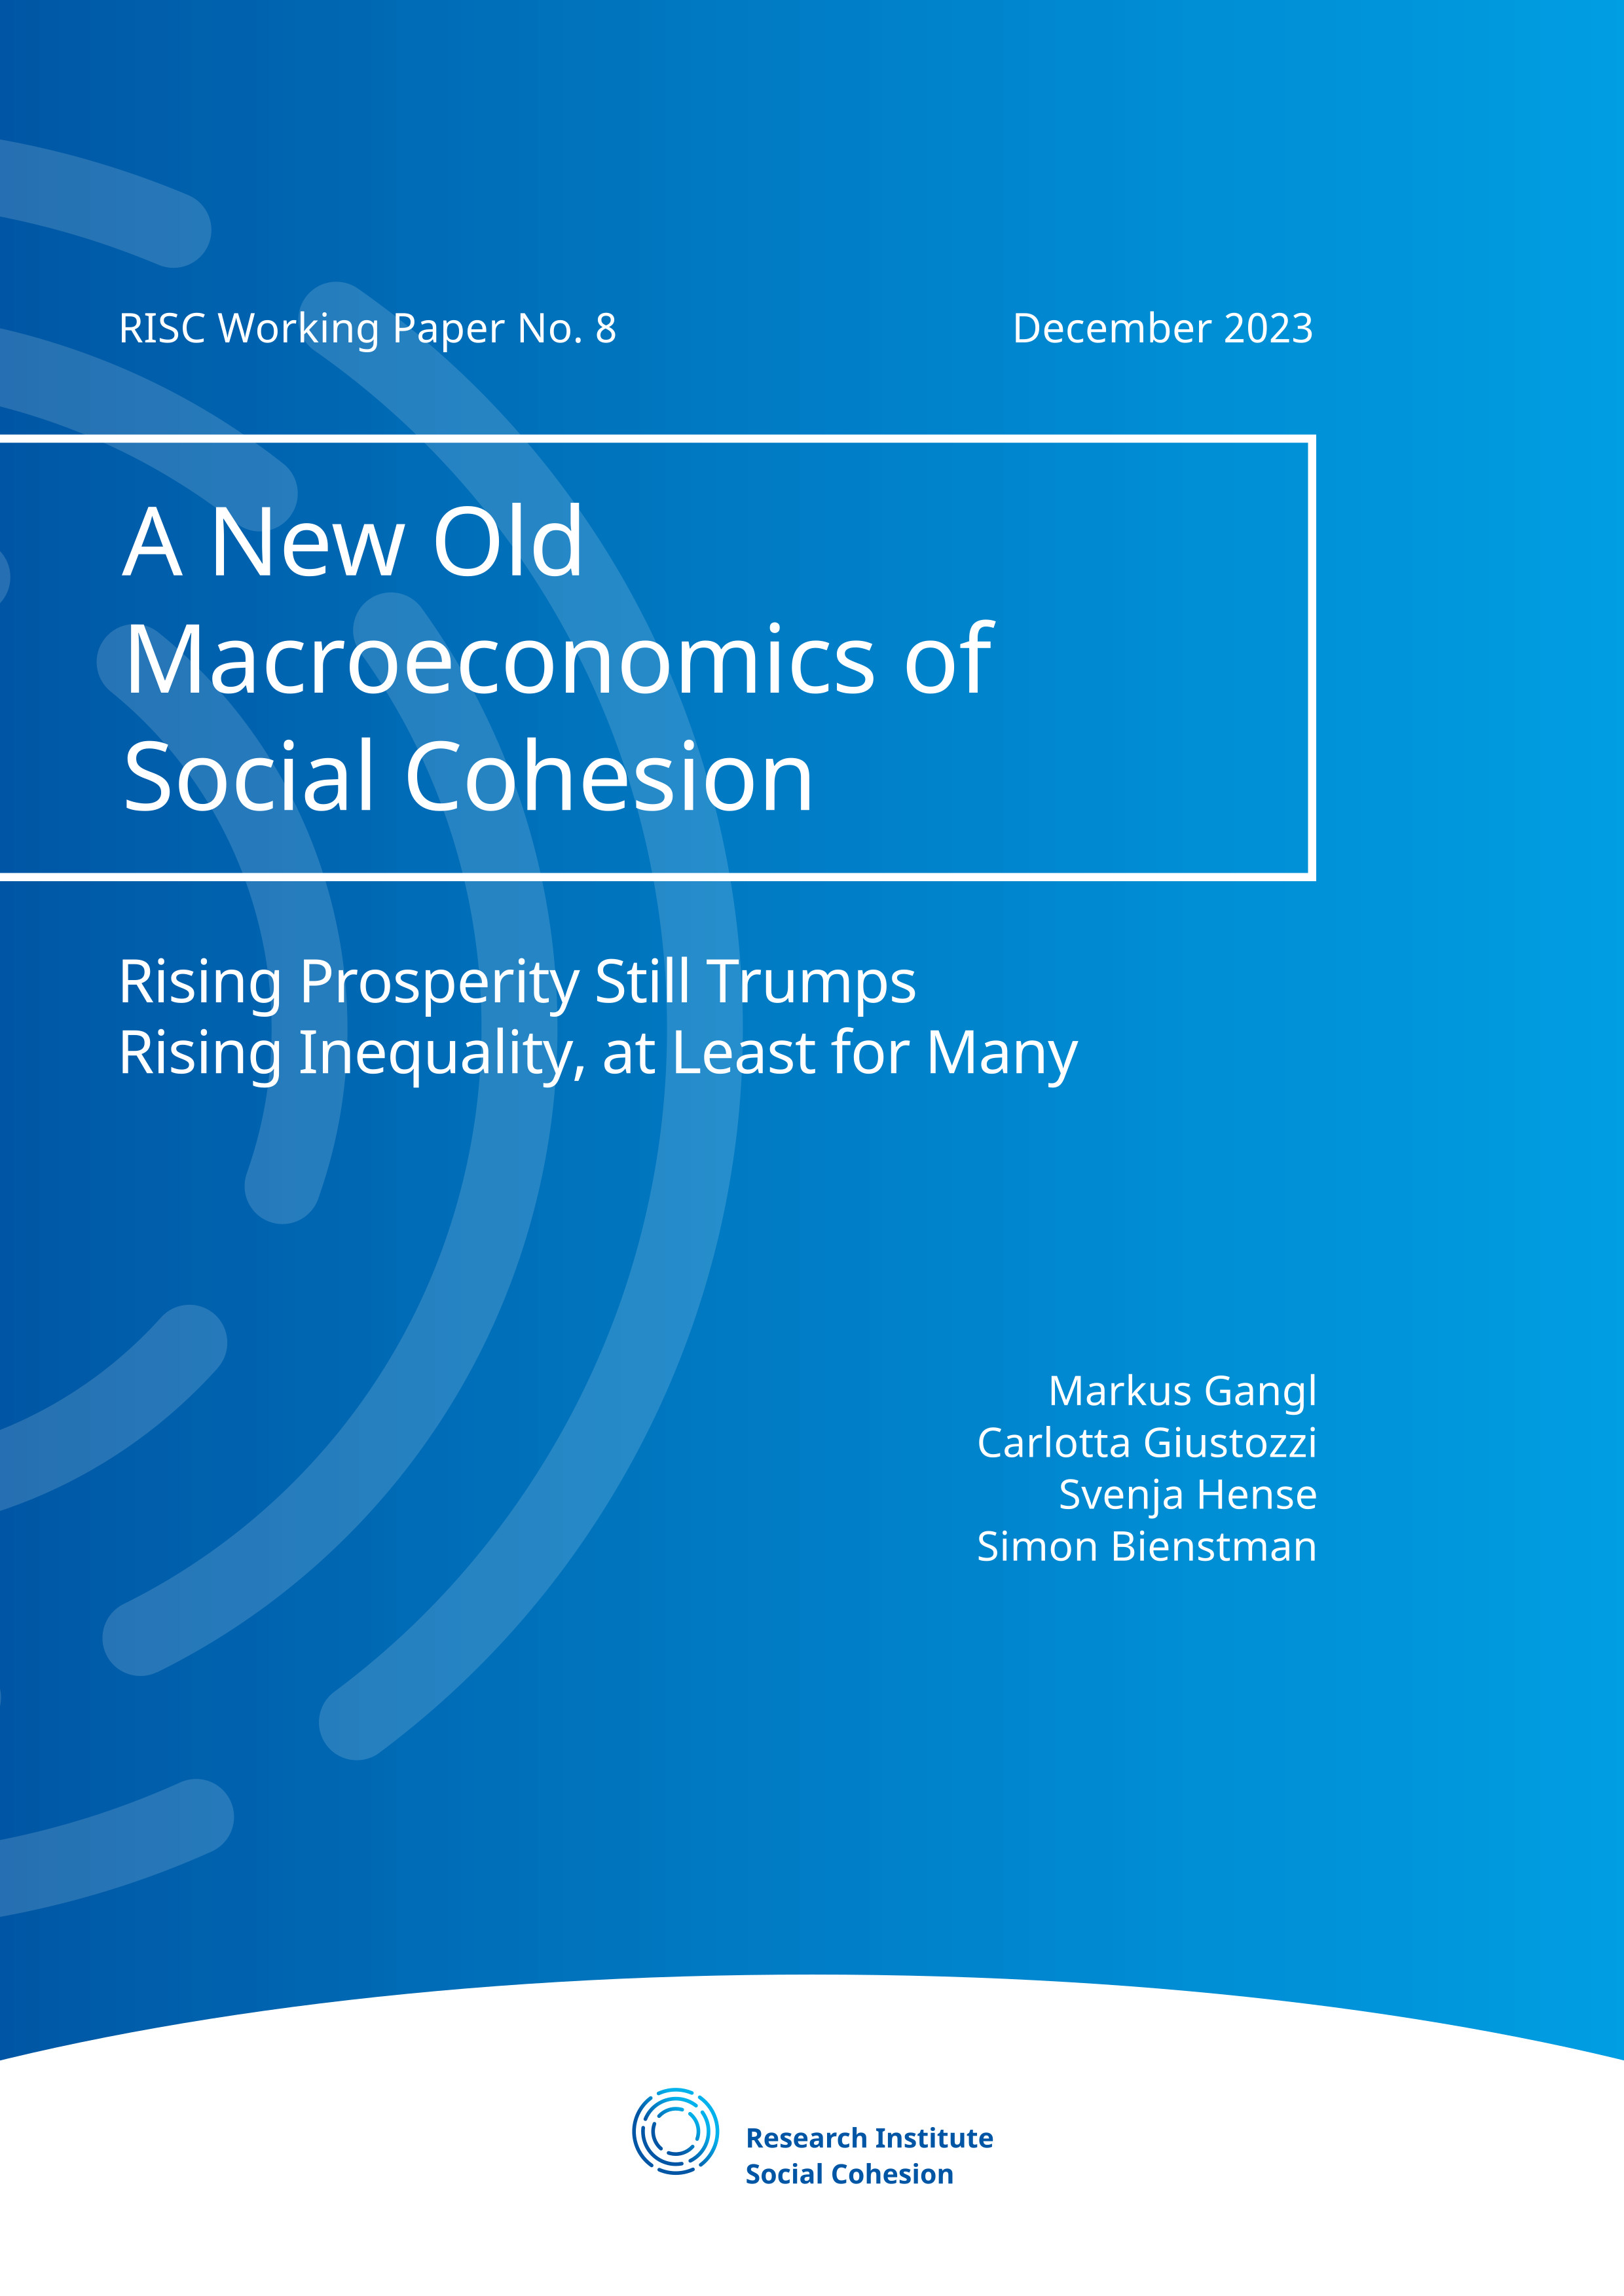 A New Old Macroeconomics of Social Cohesion: Rising Prosperity Still Trumps Rising Inequality, at Least for Many